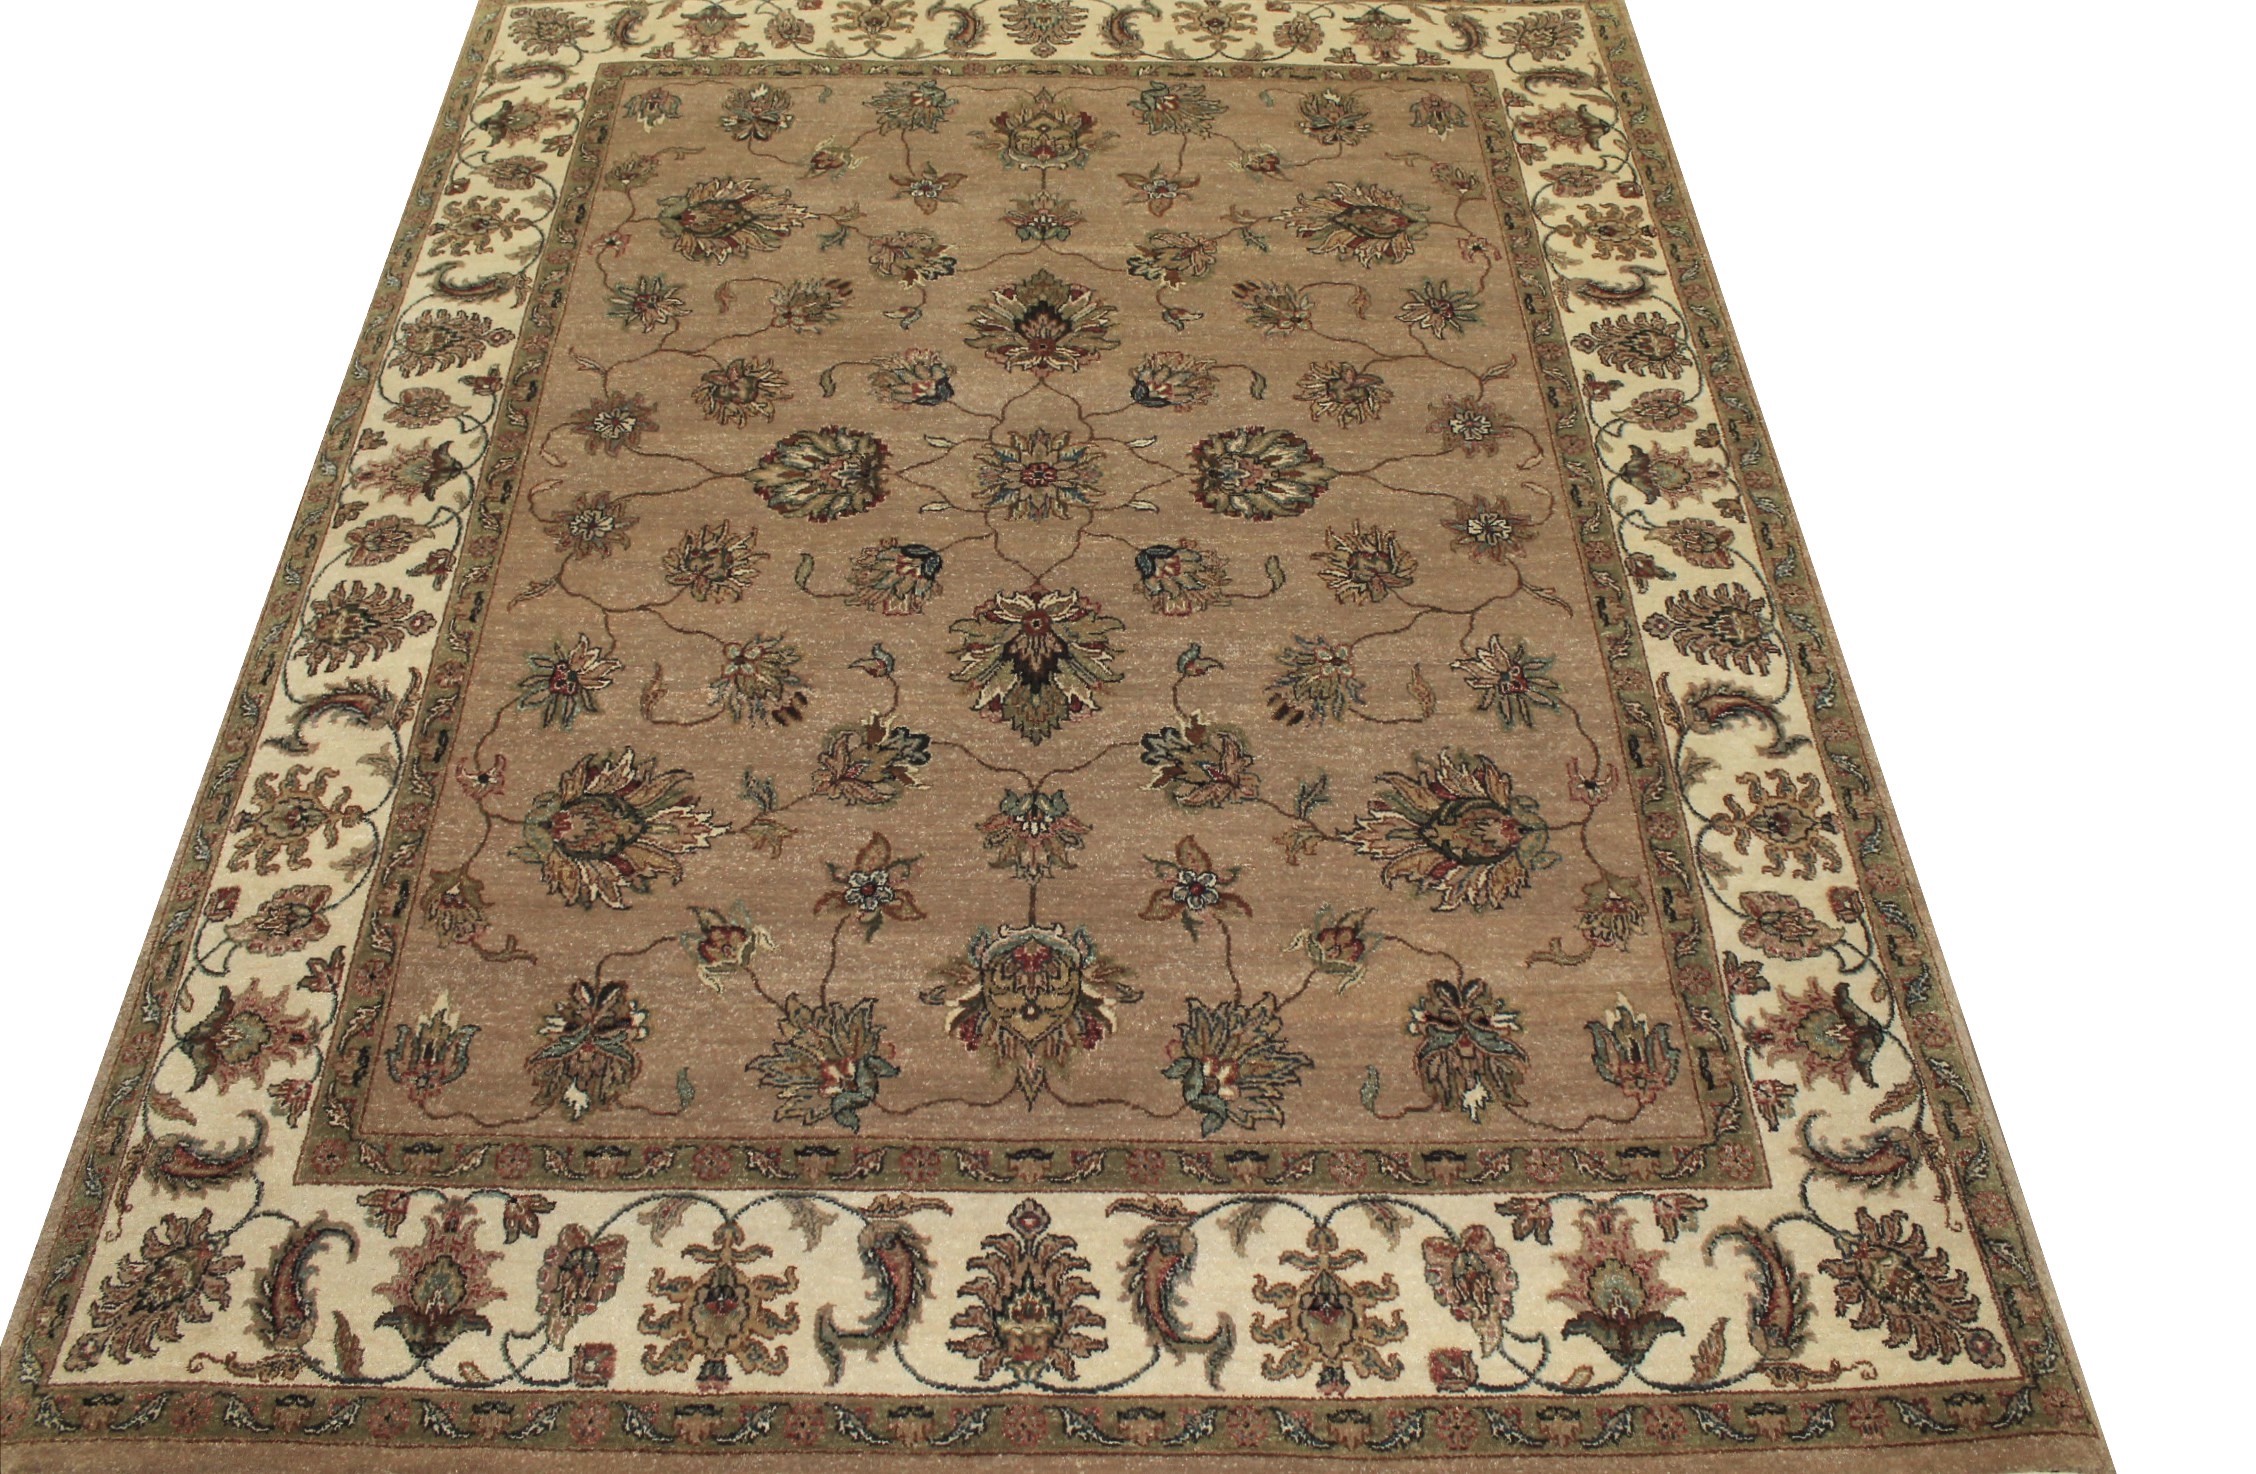 Clearance & Discount Rugs Hand Knotted Wool Rug 7998 Camel - Taupe & Ivory - Beige Hand Knotted Rug